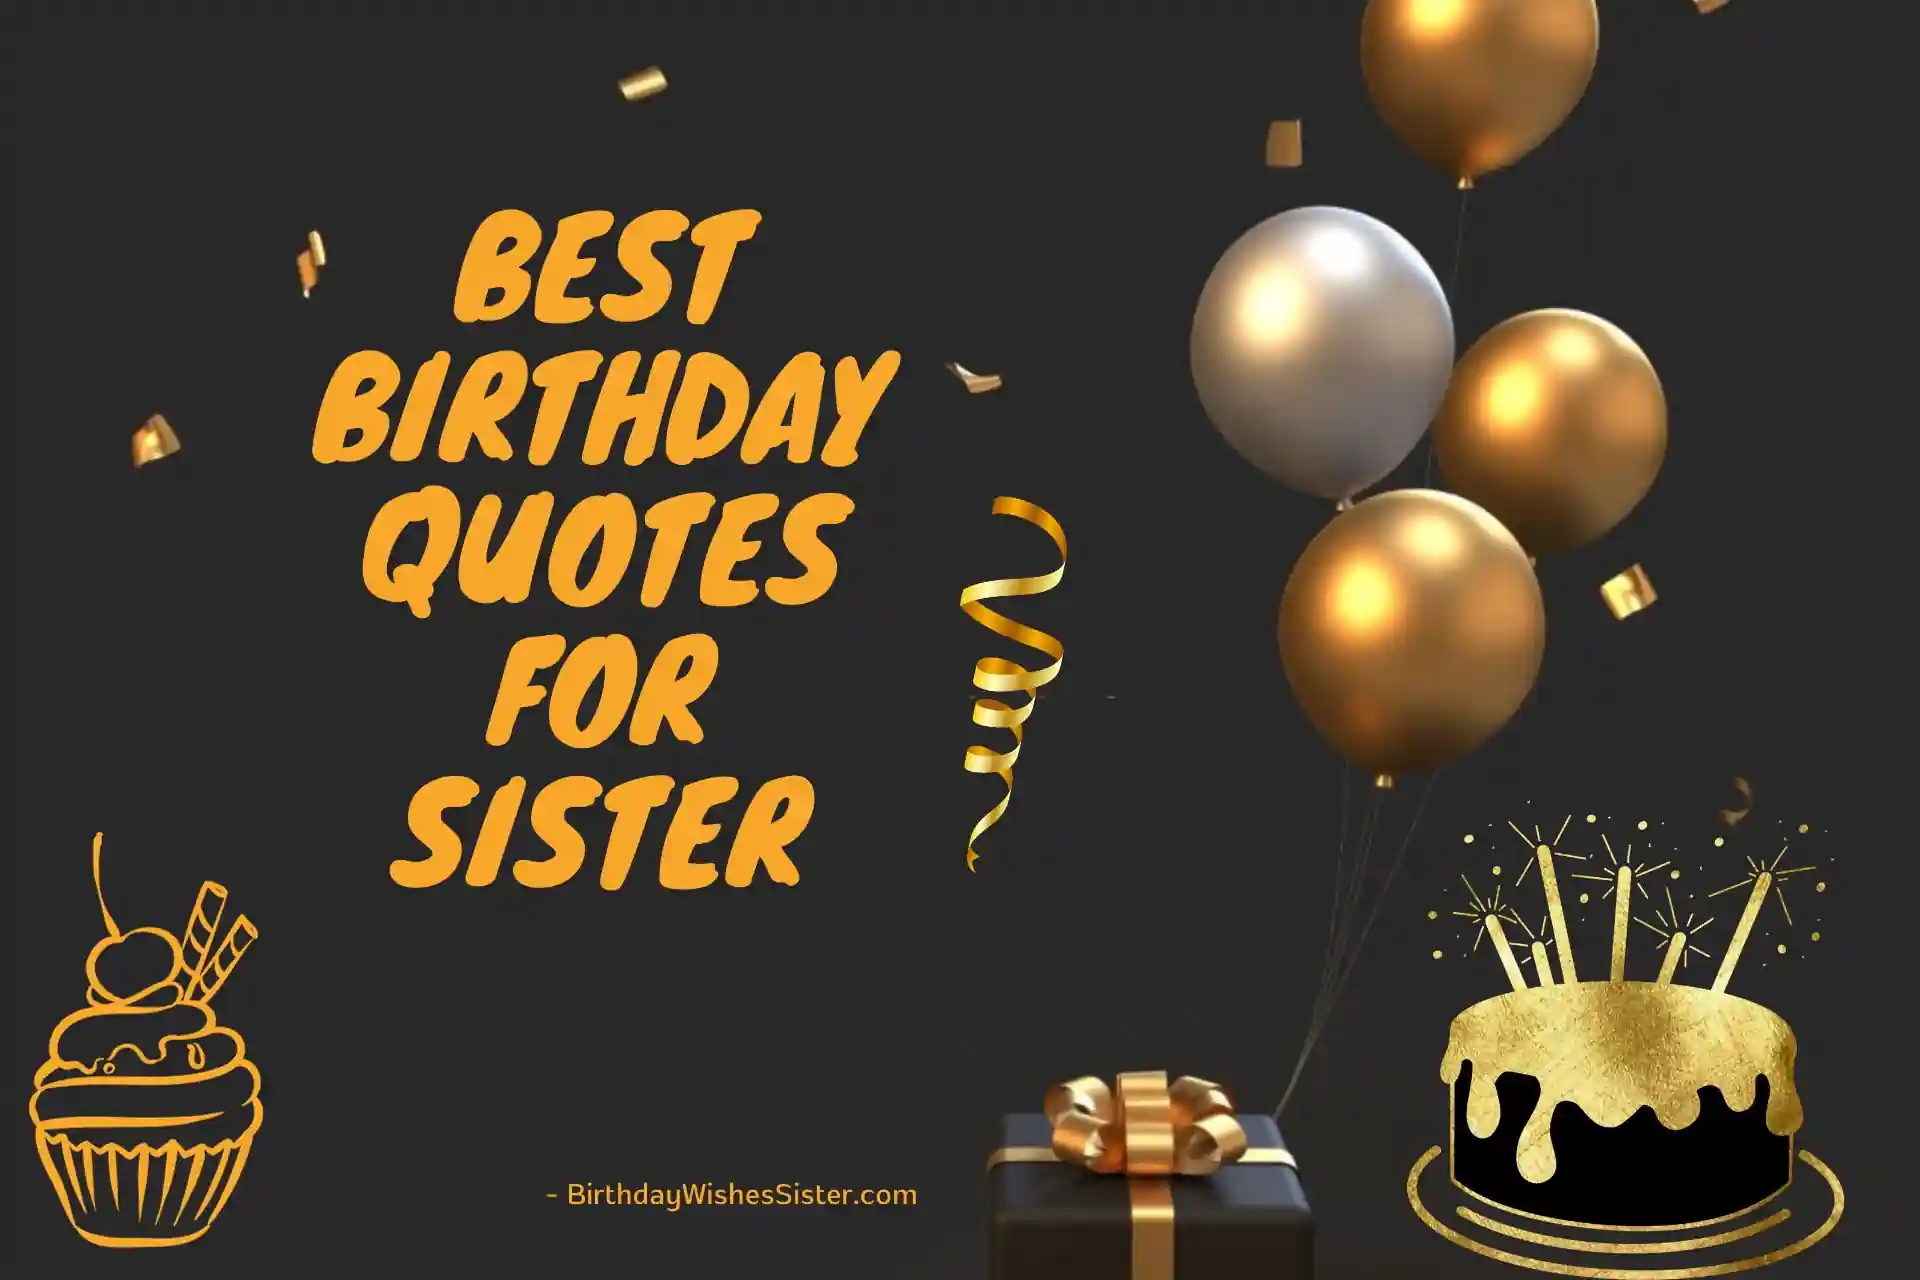 Best Birthday Quotes For Sister